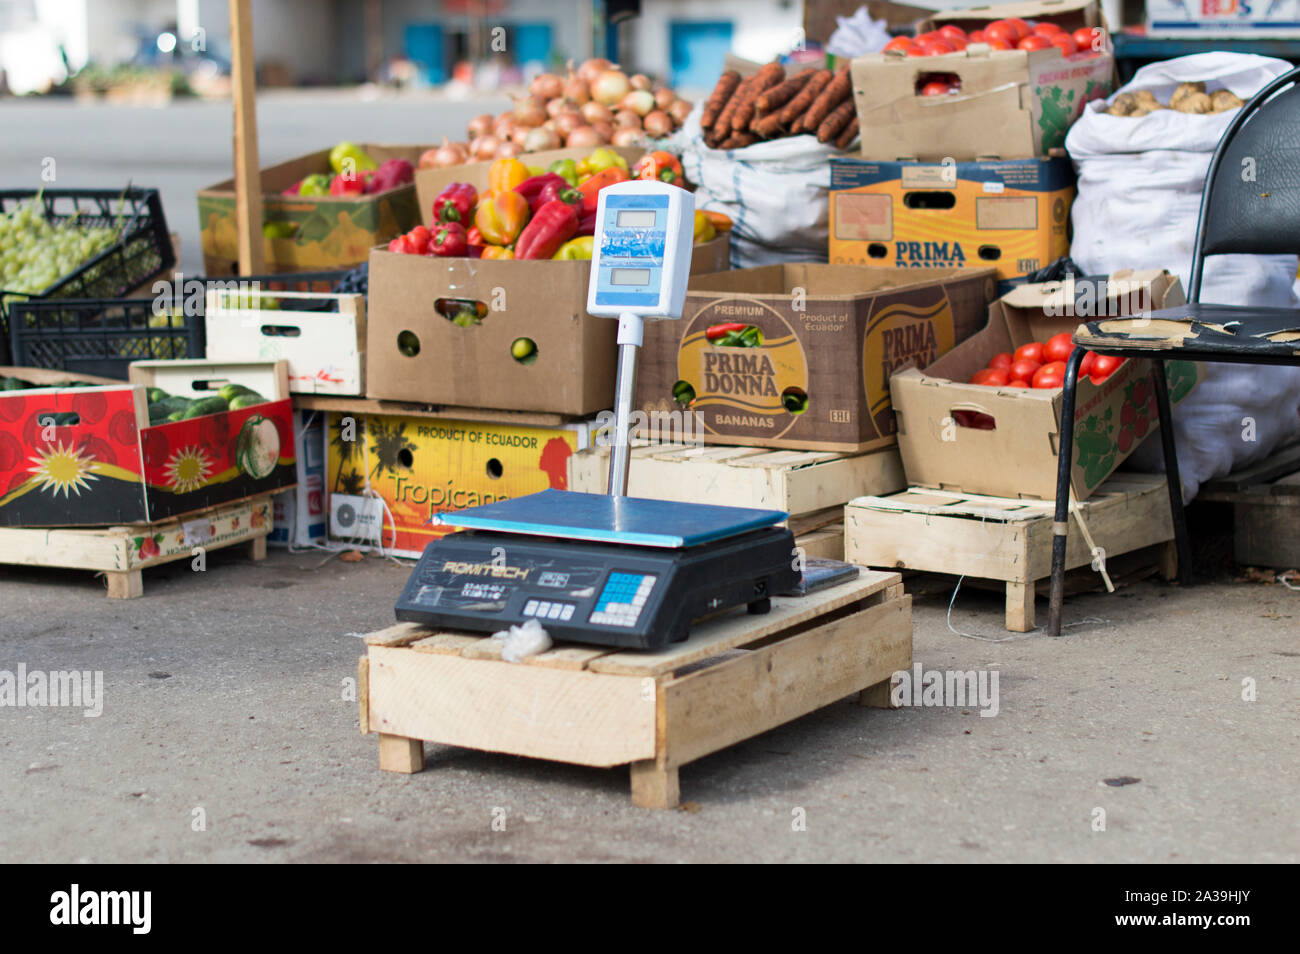 Electronic scales for weighing food in the market. They stand in the open. Russia. Stock Photo